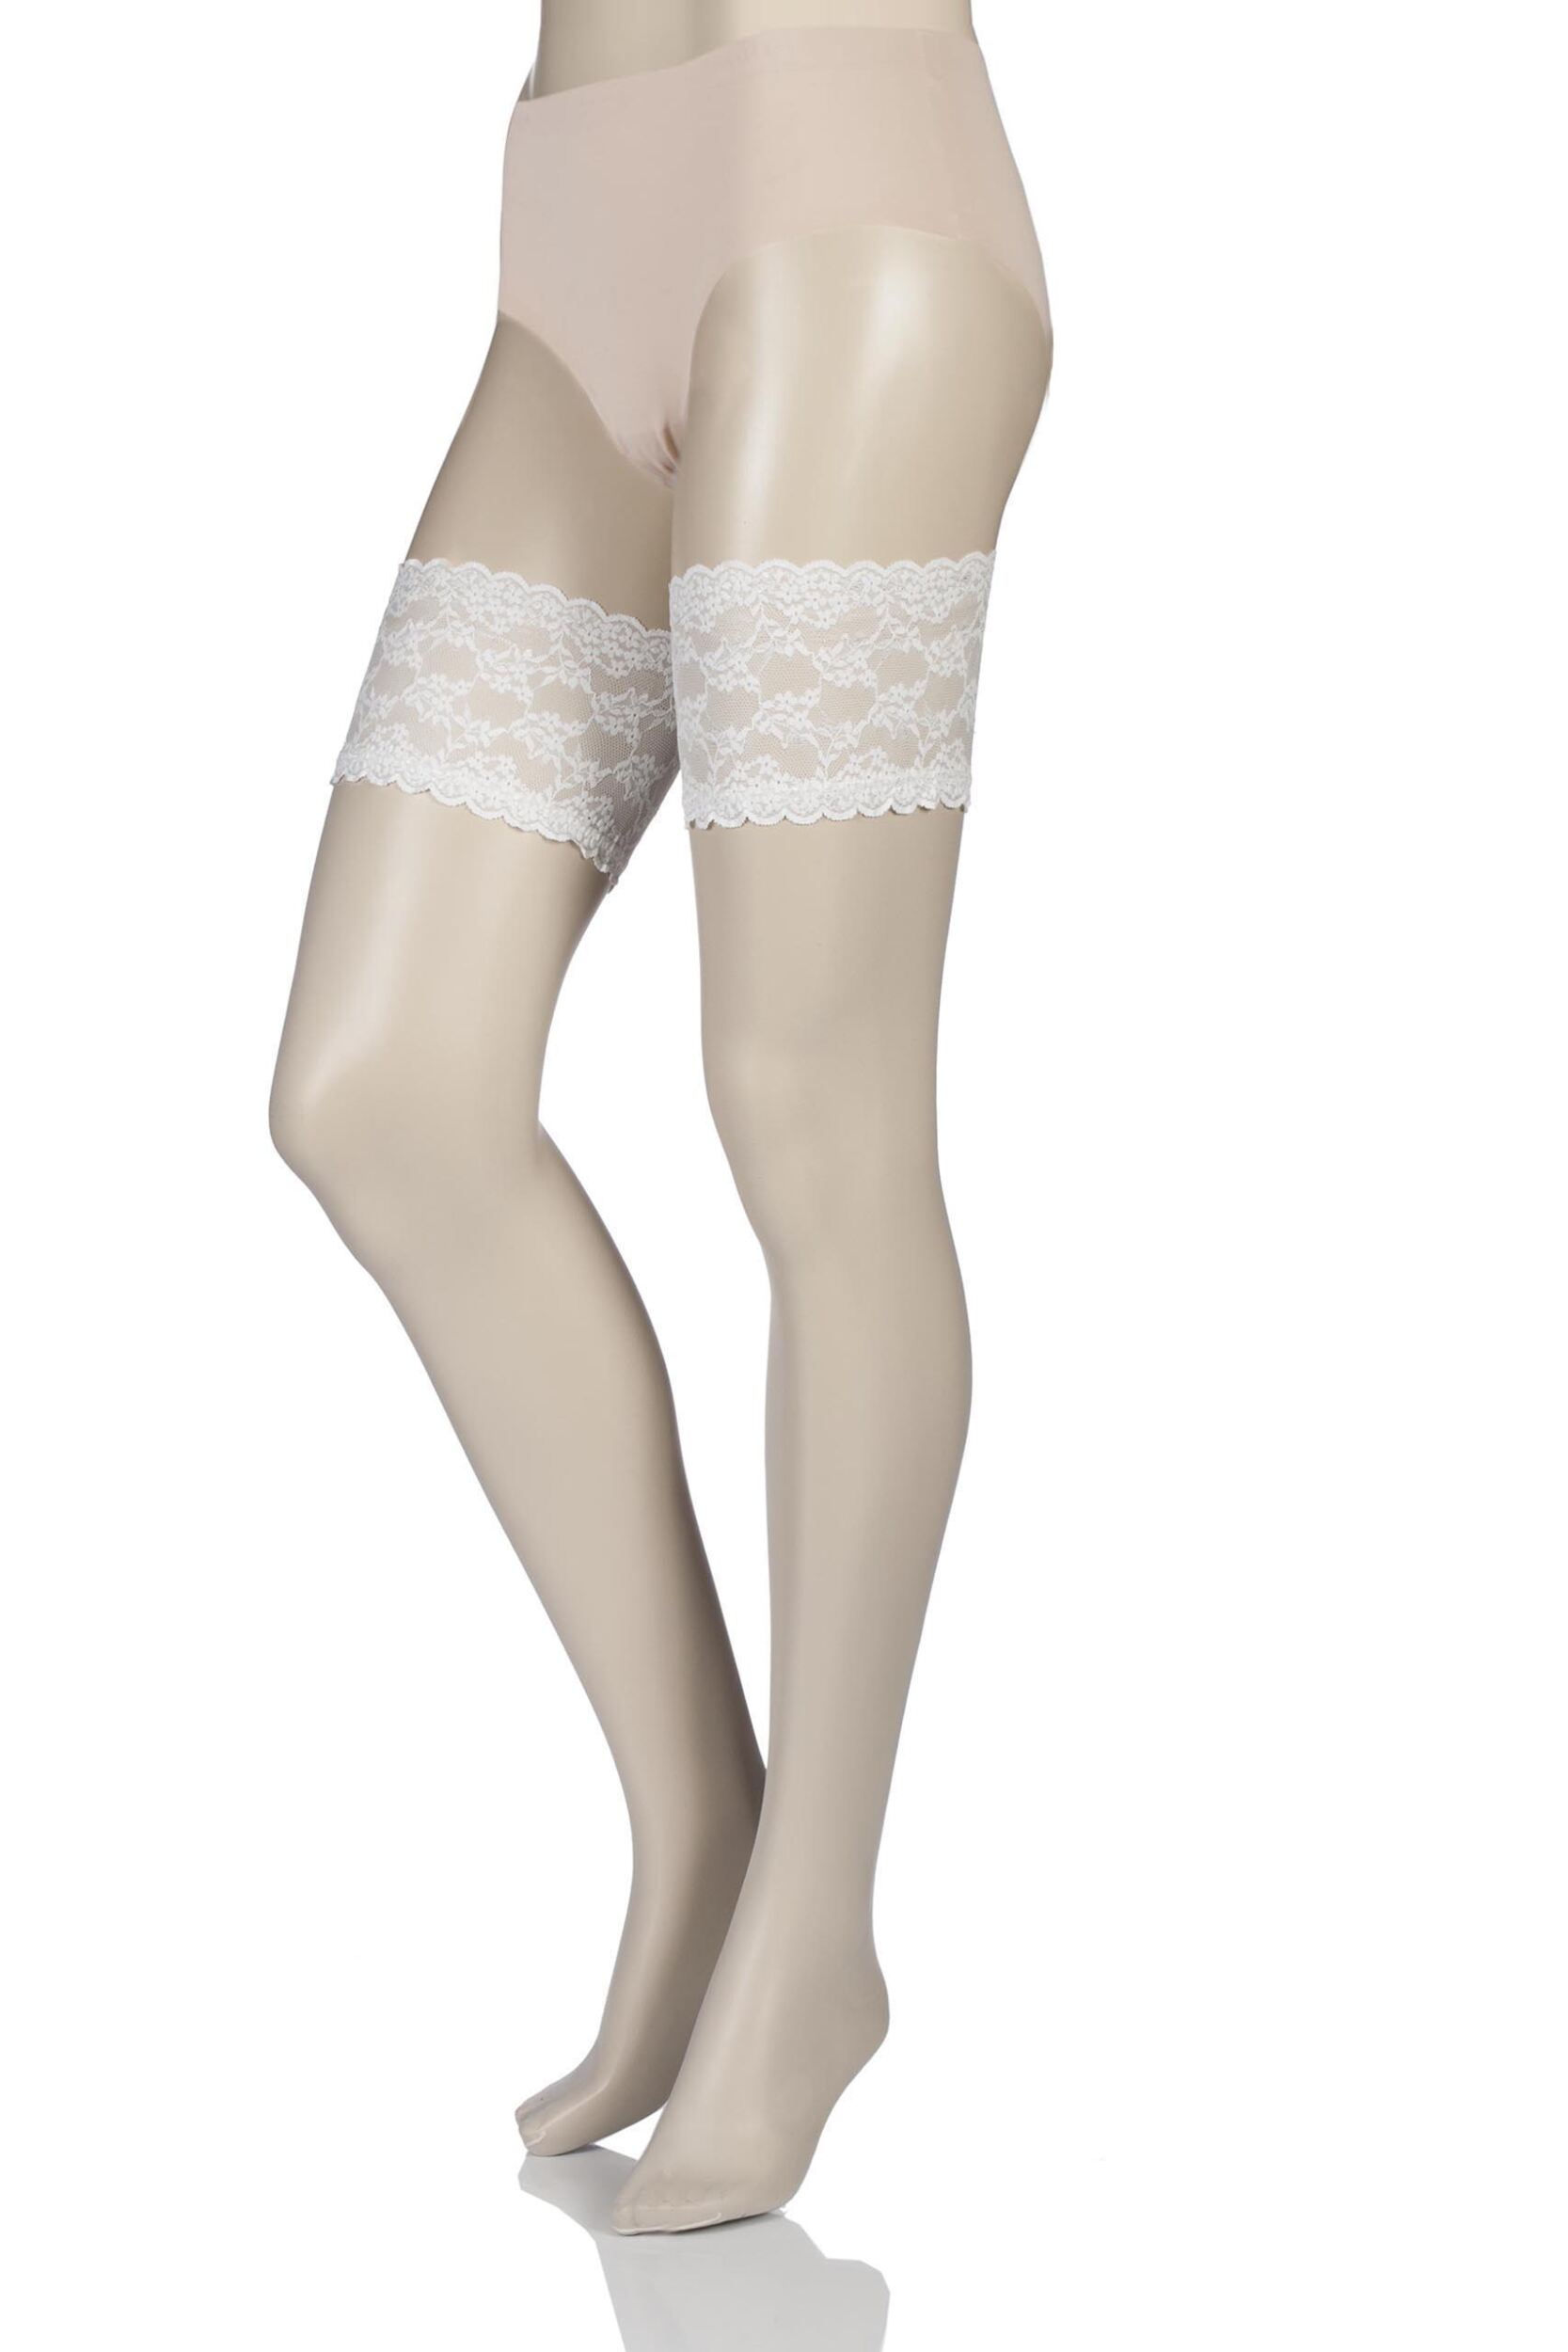 1 Pair Champagne 10 Denier Bridal Lace Top Hold Ups Ladies Large - Charnos